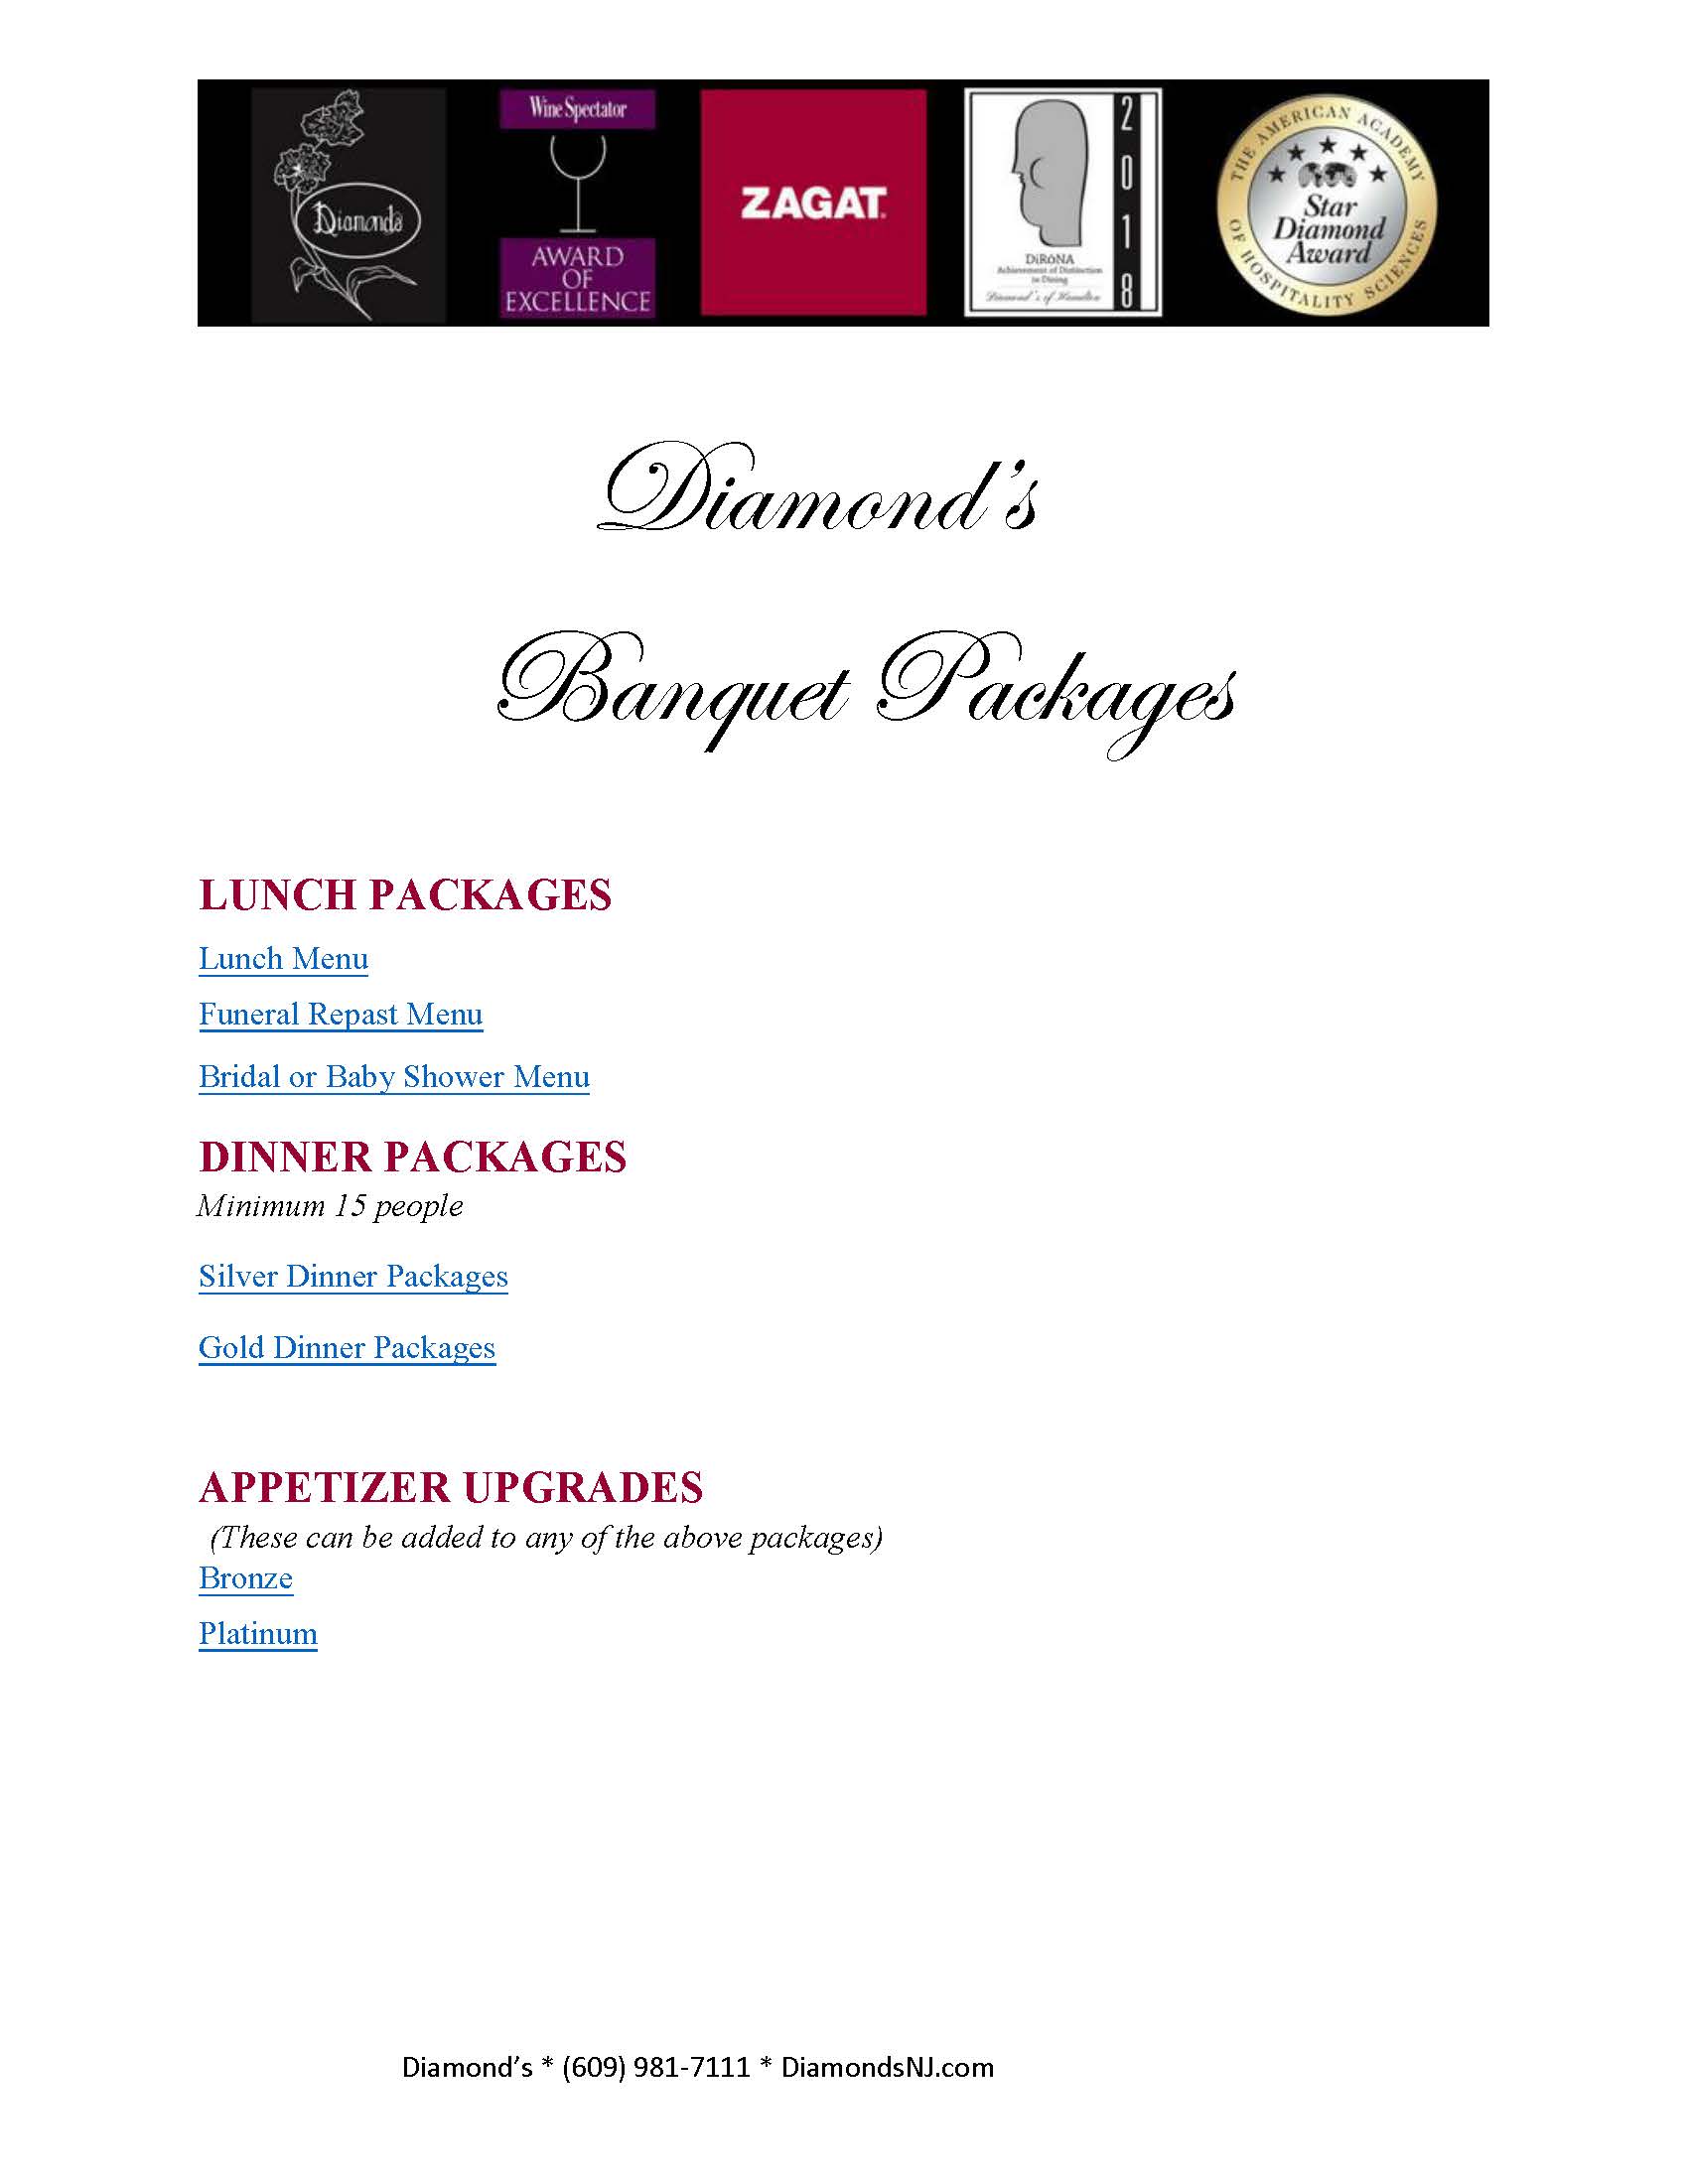 Diamond's banquet packages.